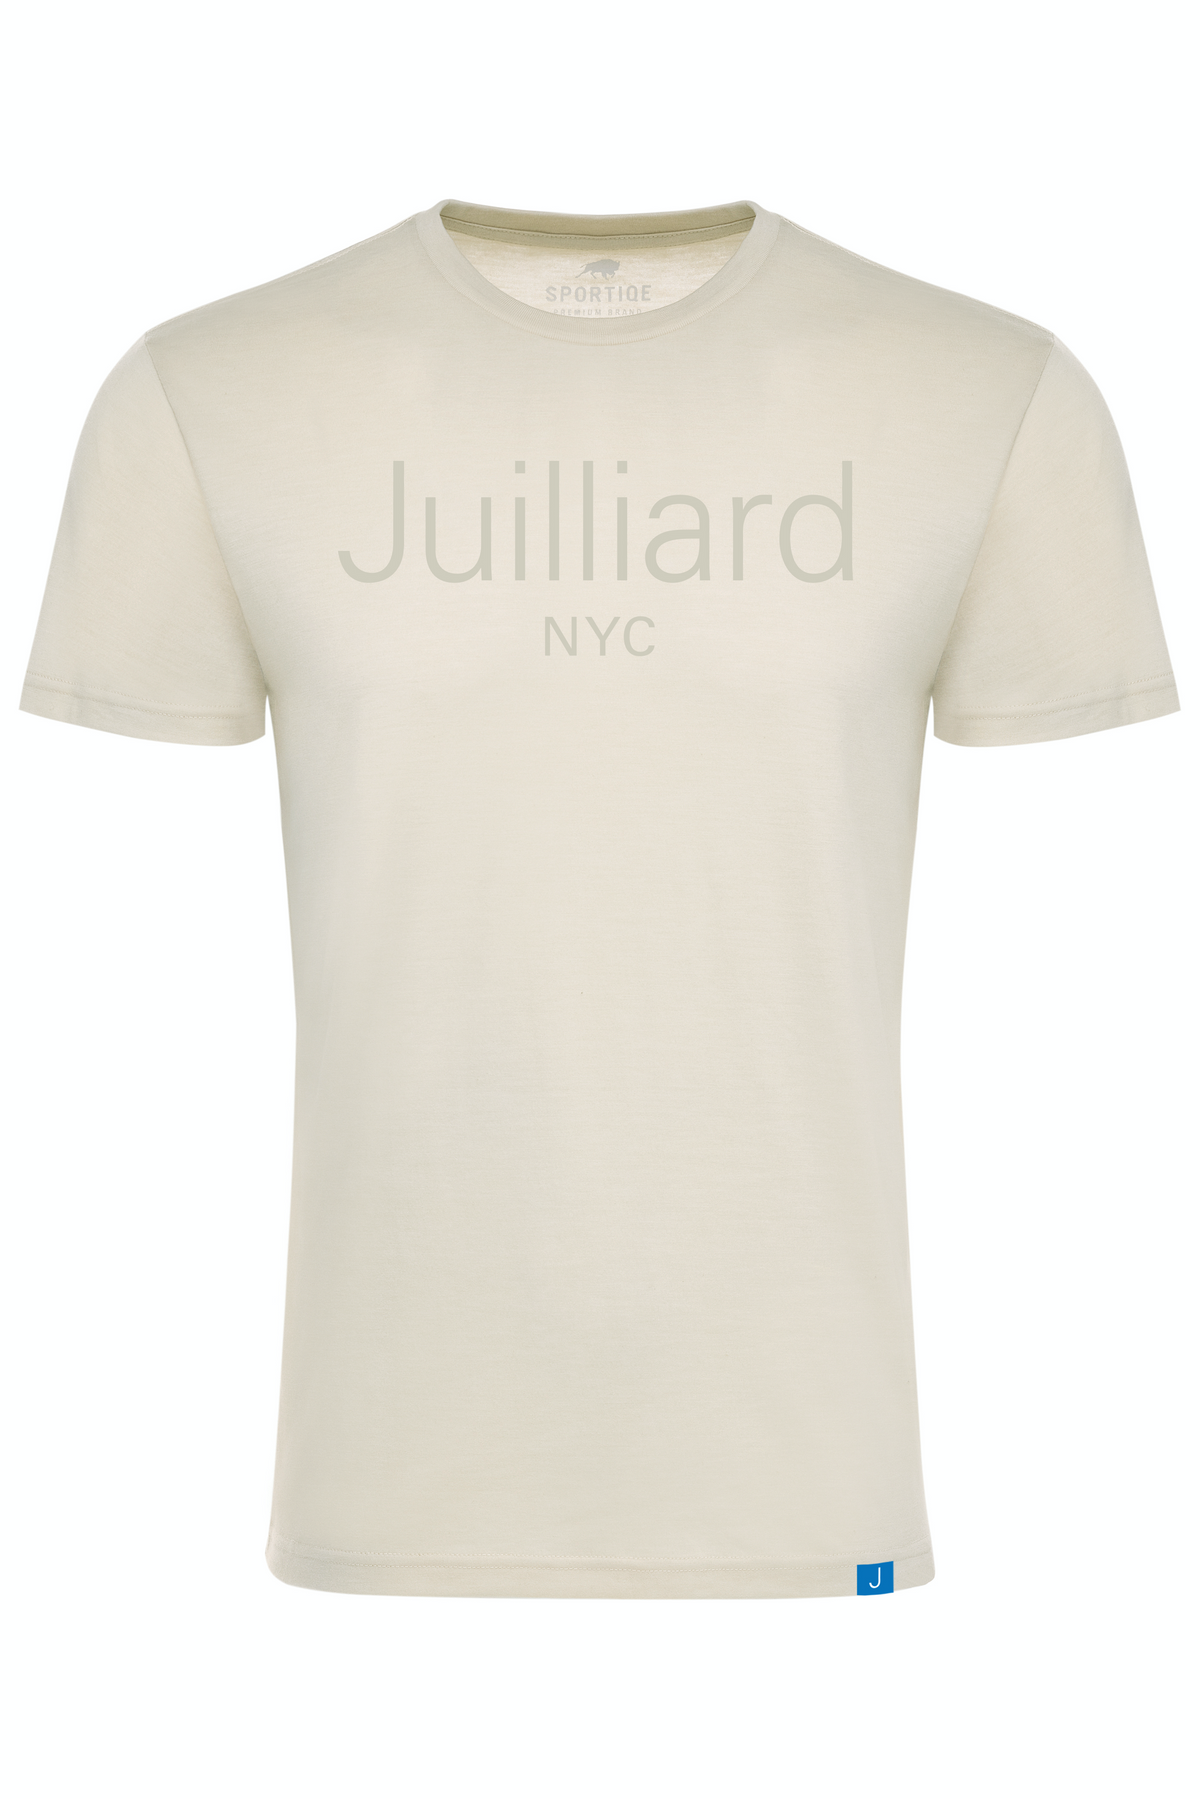 T-shirt: Juilliard NYC Bone with Ghost Ink FINAL SALE CLEARANCE